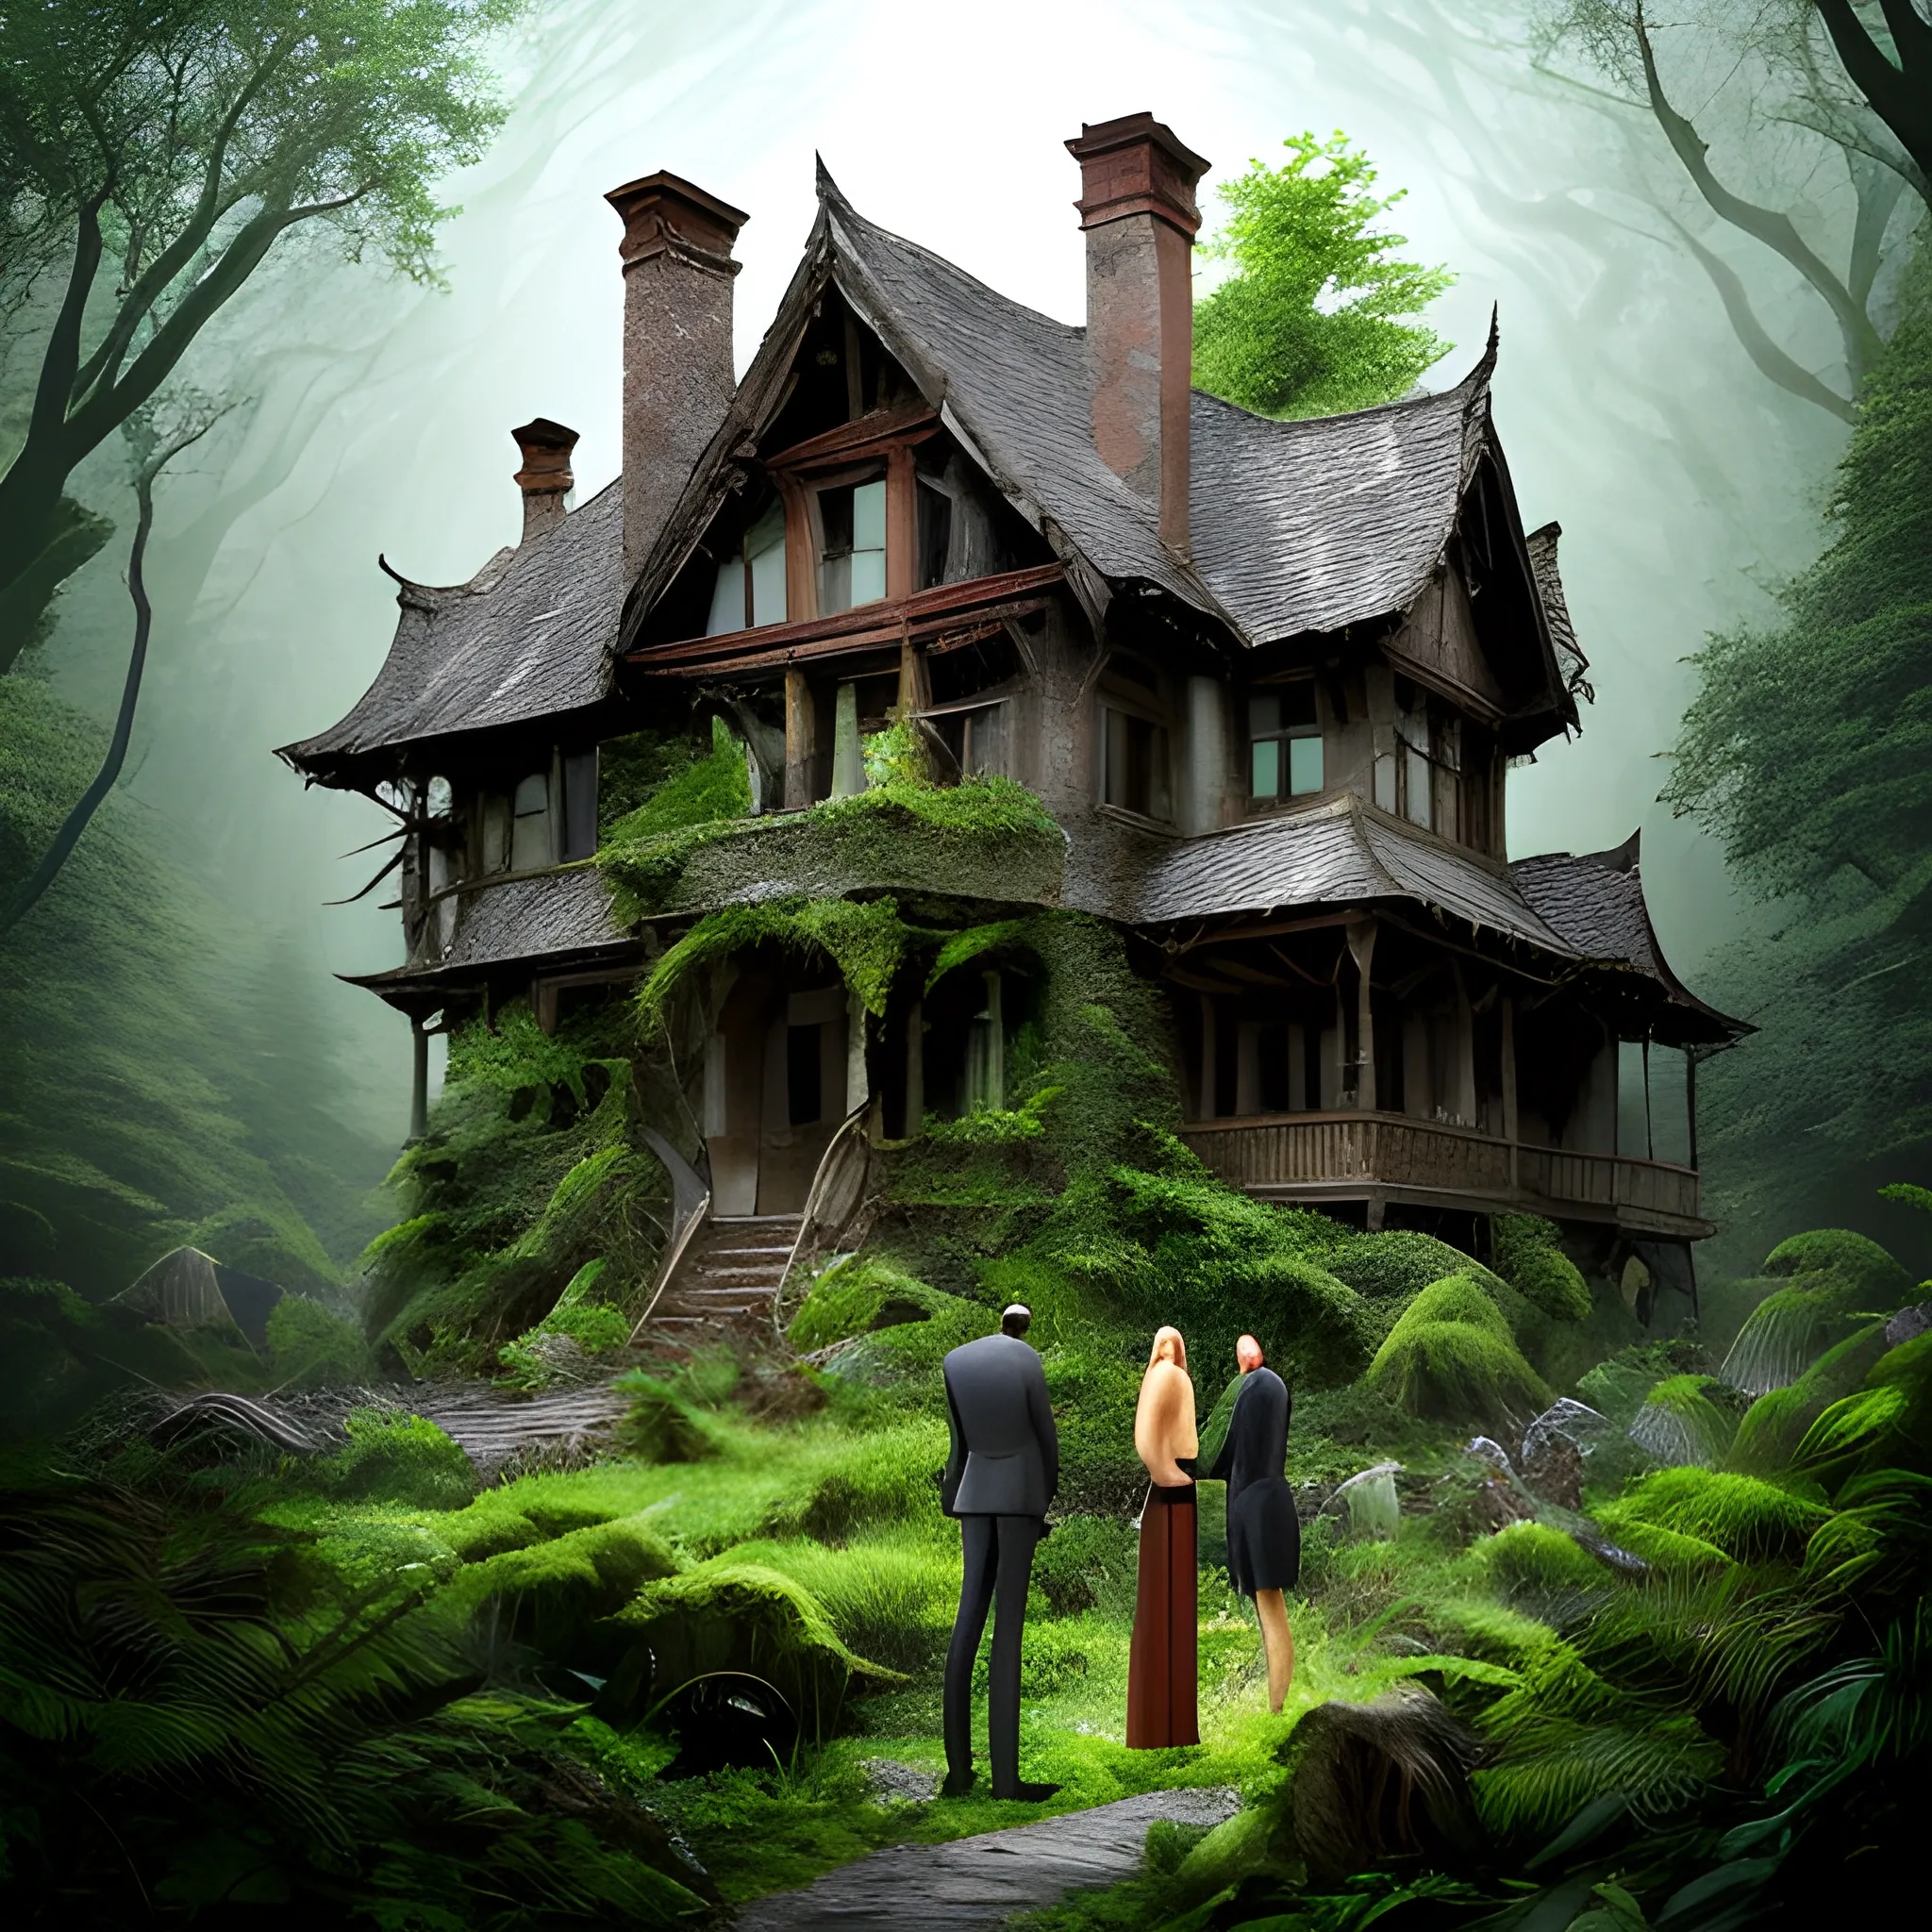 Description: Picture four children (two boys and two girls) standing at the edge of a dense forest. They should look intrigued and maybe a bit cautious as they observe an old, eerie house that seems to have appeared among the trees. The house should look dilapidated, with broken windows and ivy creeping up its walls.
Image Elements: Dense forest, old house, four children (different ages and appearances), curious and cautious expressions. , Realistic , vibrant